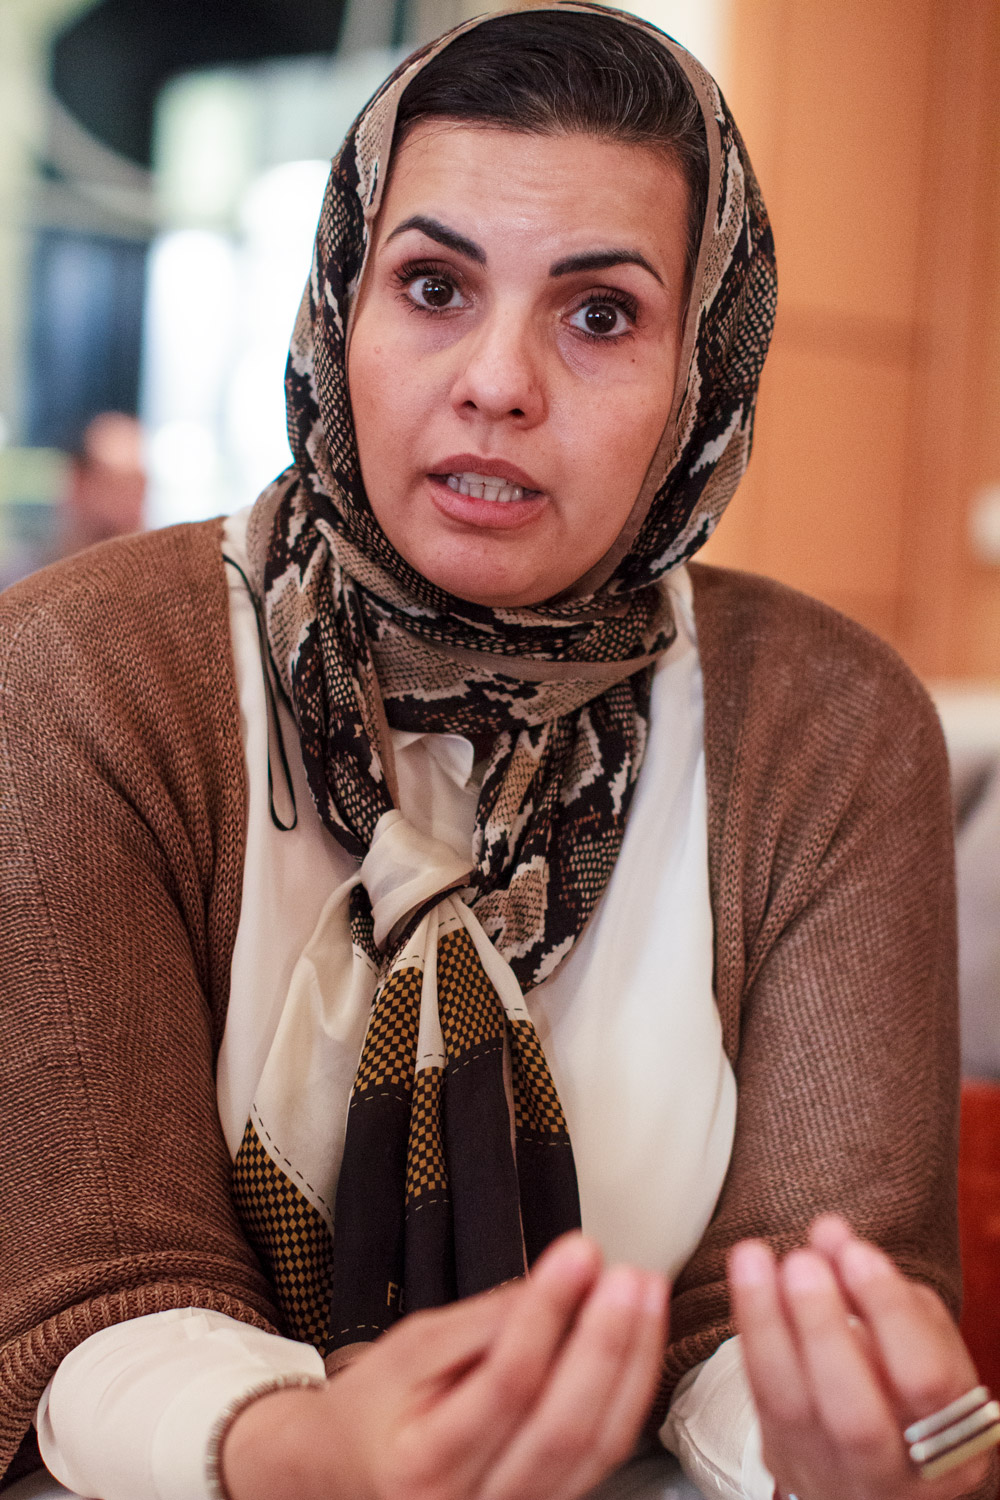 At an early age Zahra Langhi realised that political activism was putting her family in danger. 